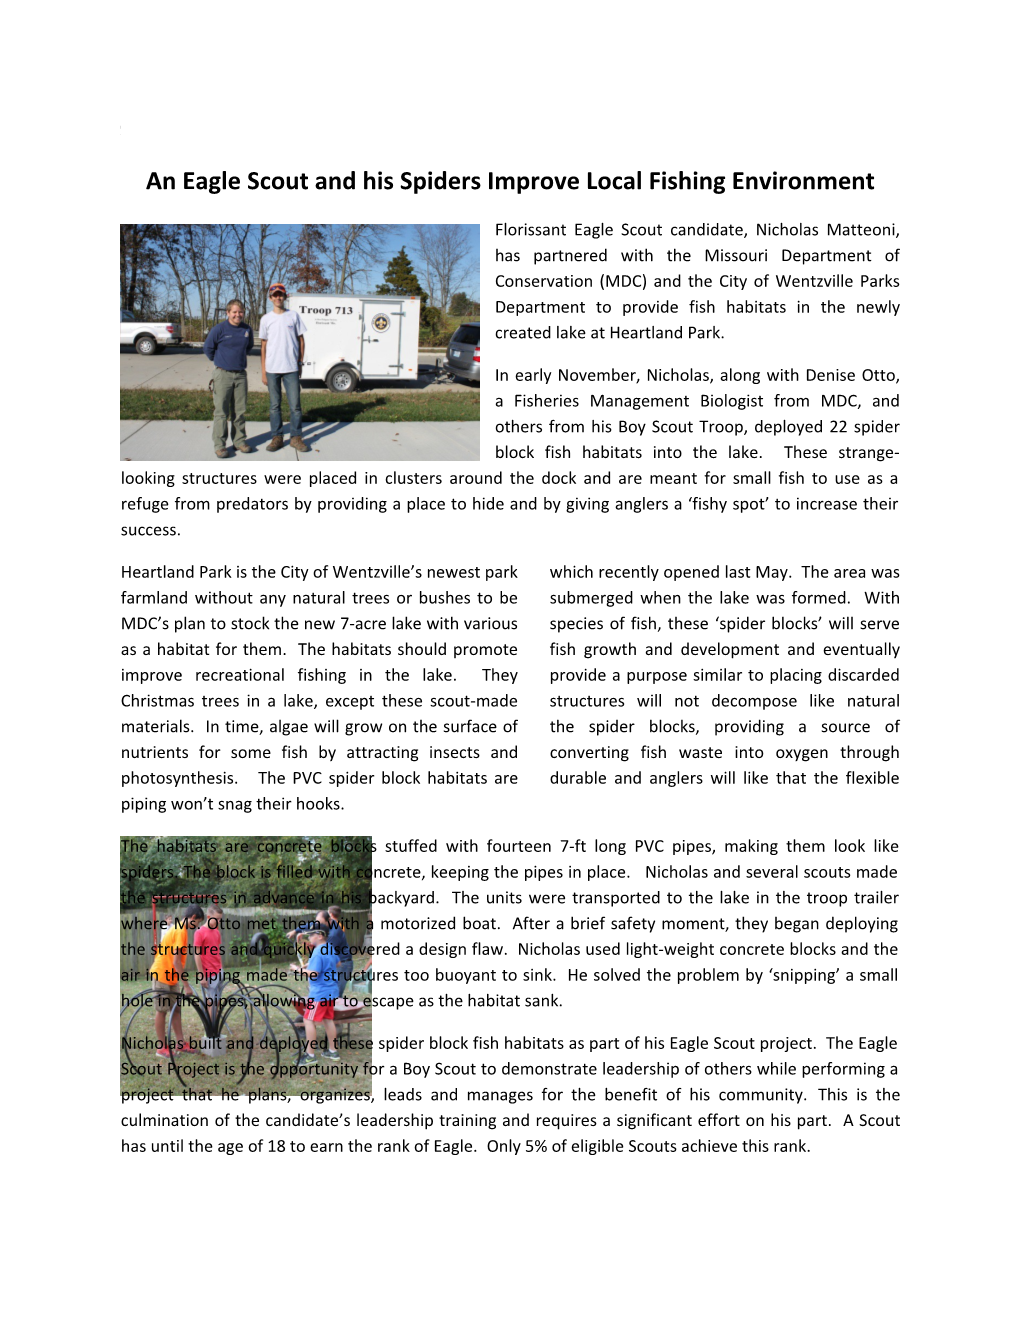 An Eagle Scout and His Spiders Improve Local Fishing Environment